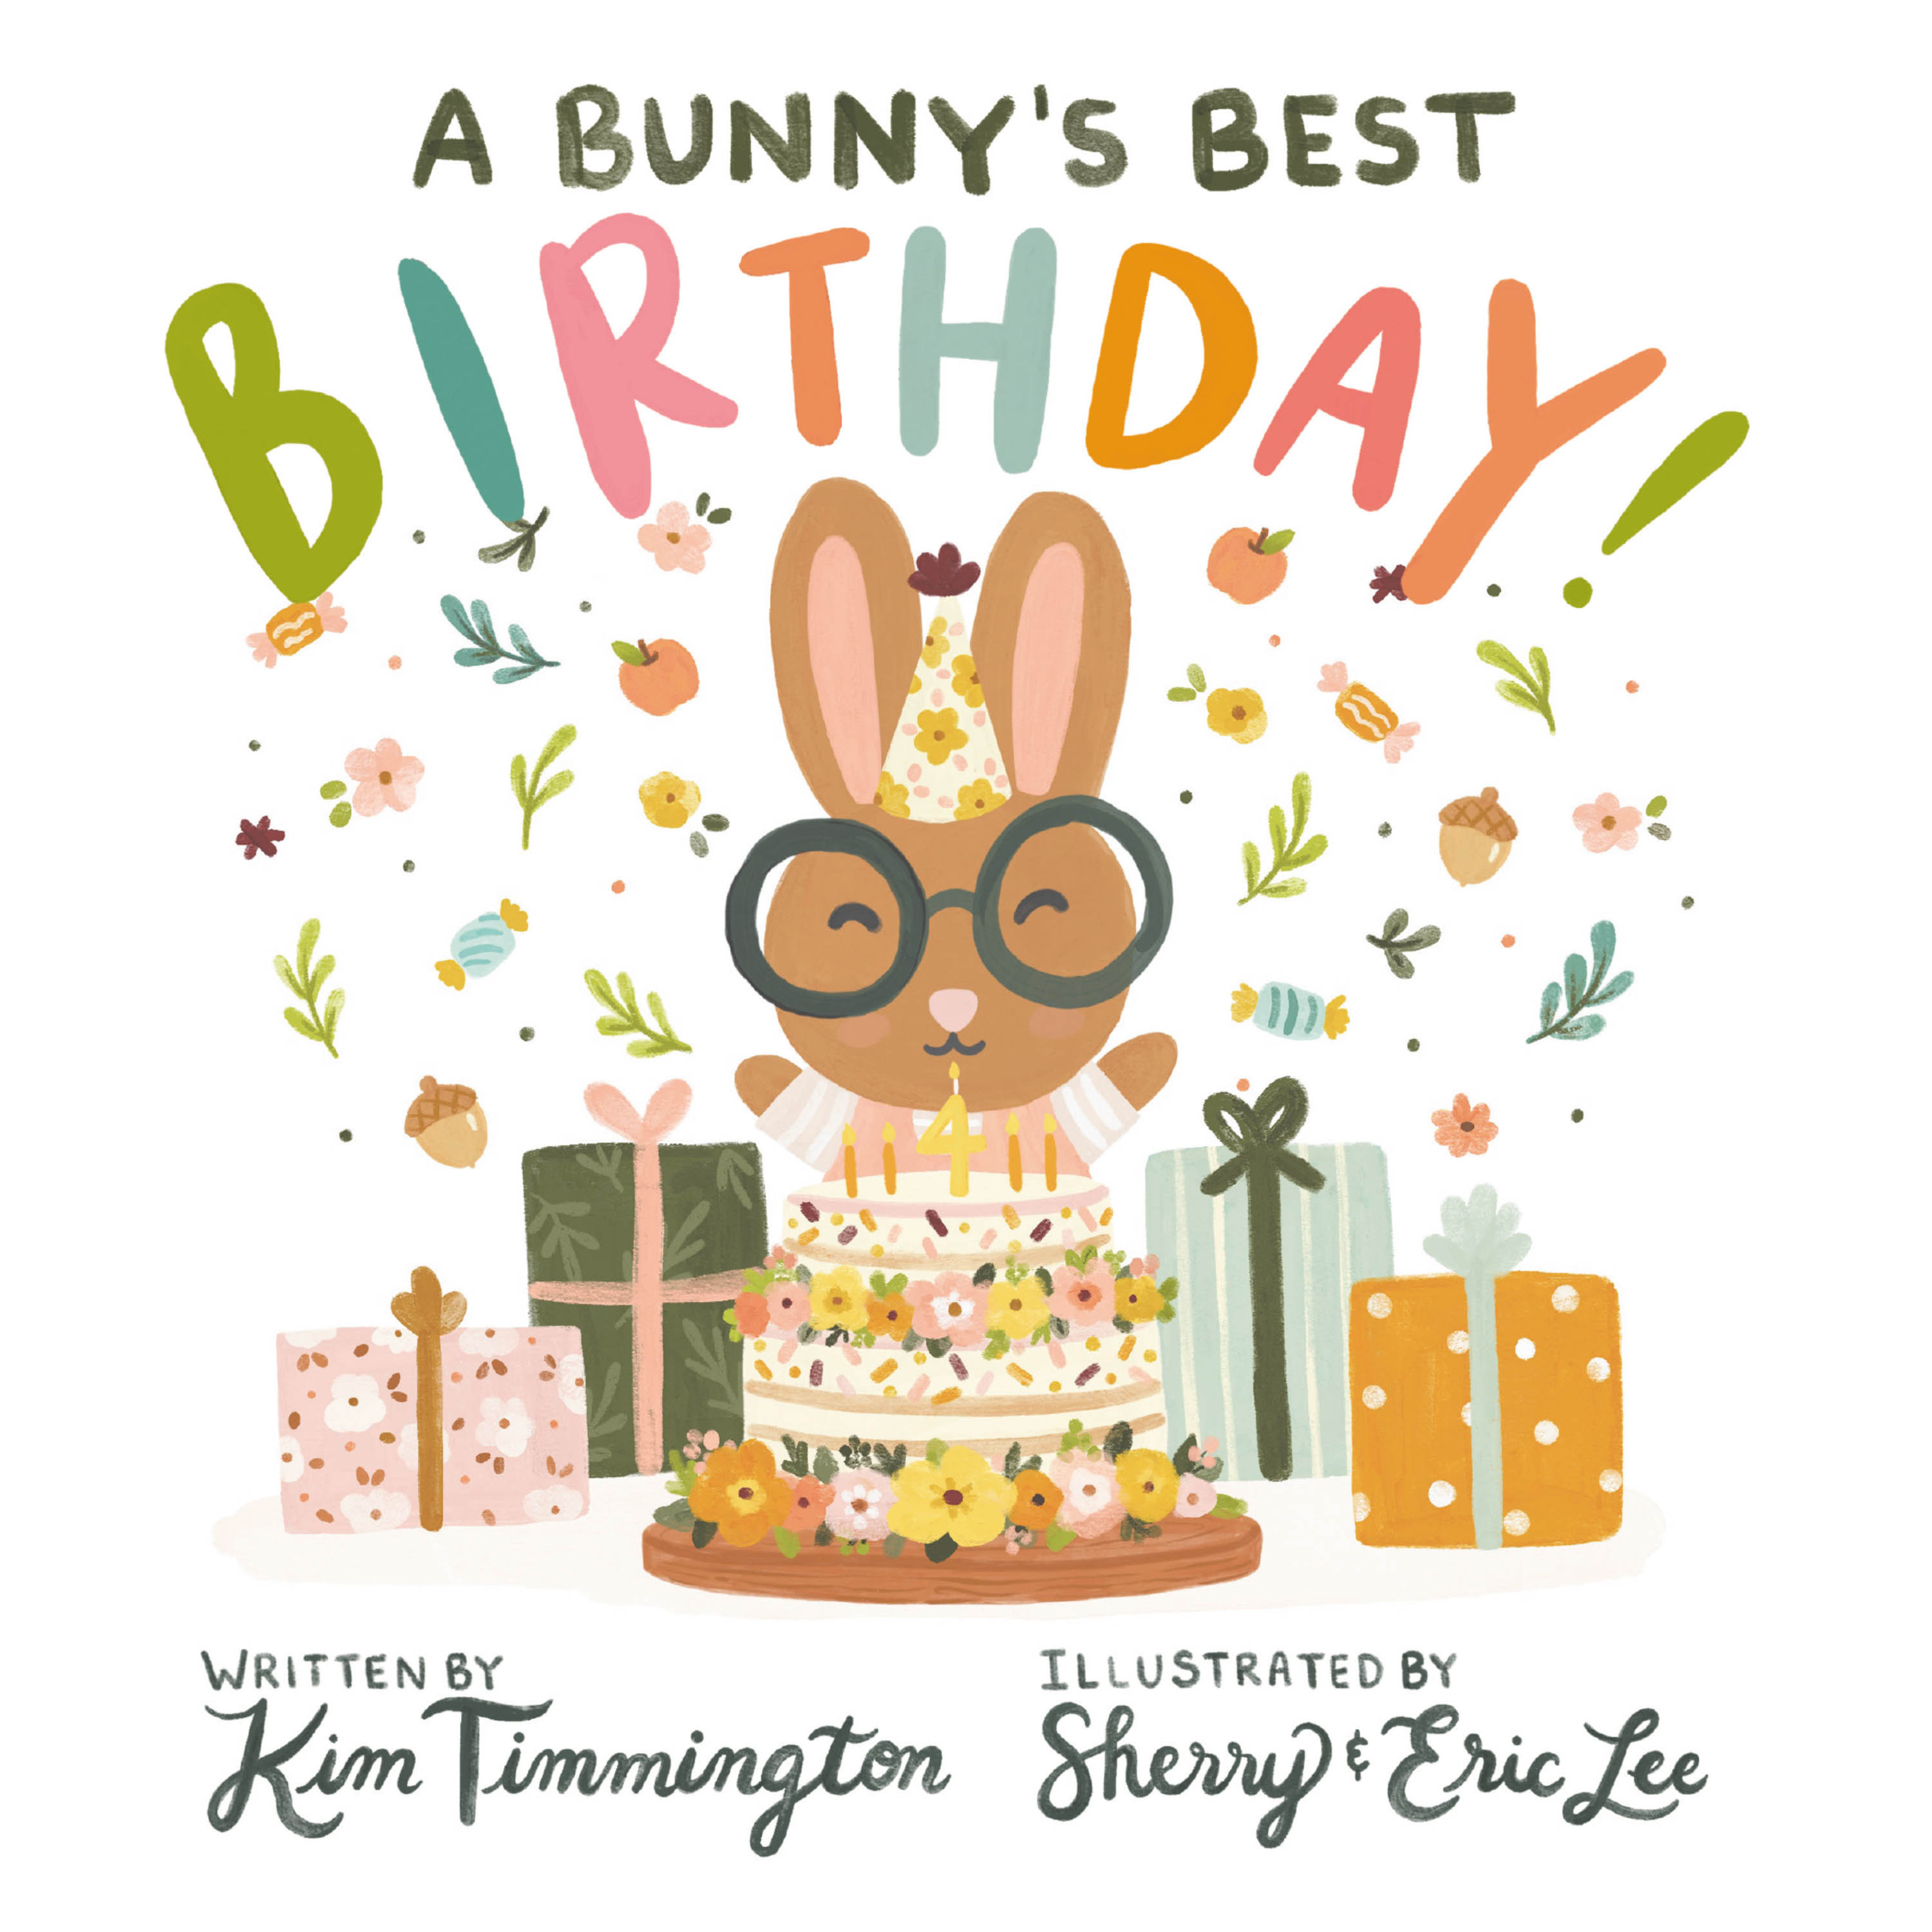 Kim Timmington’s Newly Released "A Bunny’s Best Birthday!" is a Delightful Juvenile Fiction That Celebrates the Fun of a Birthday with Loved Ones